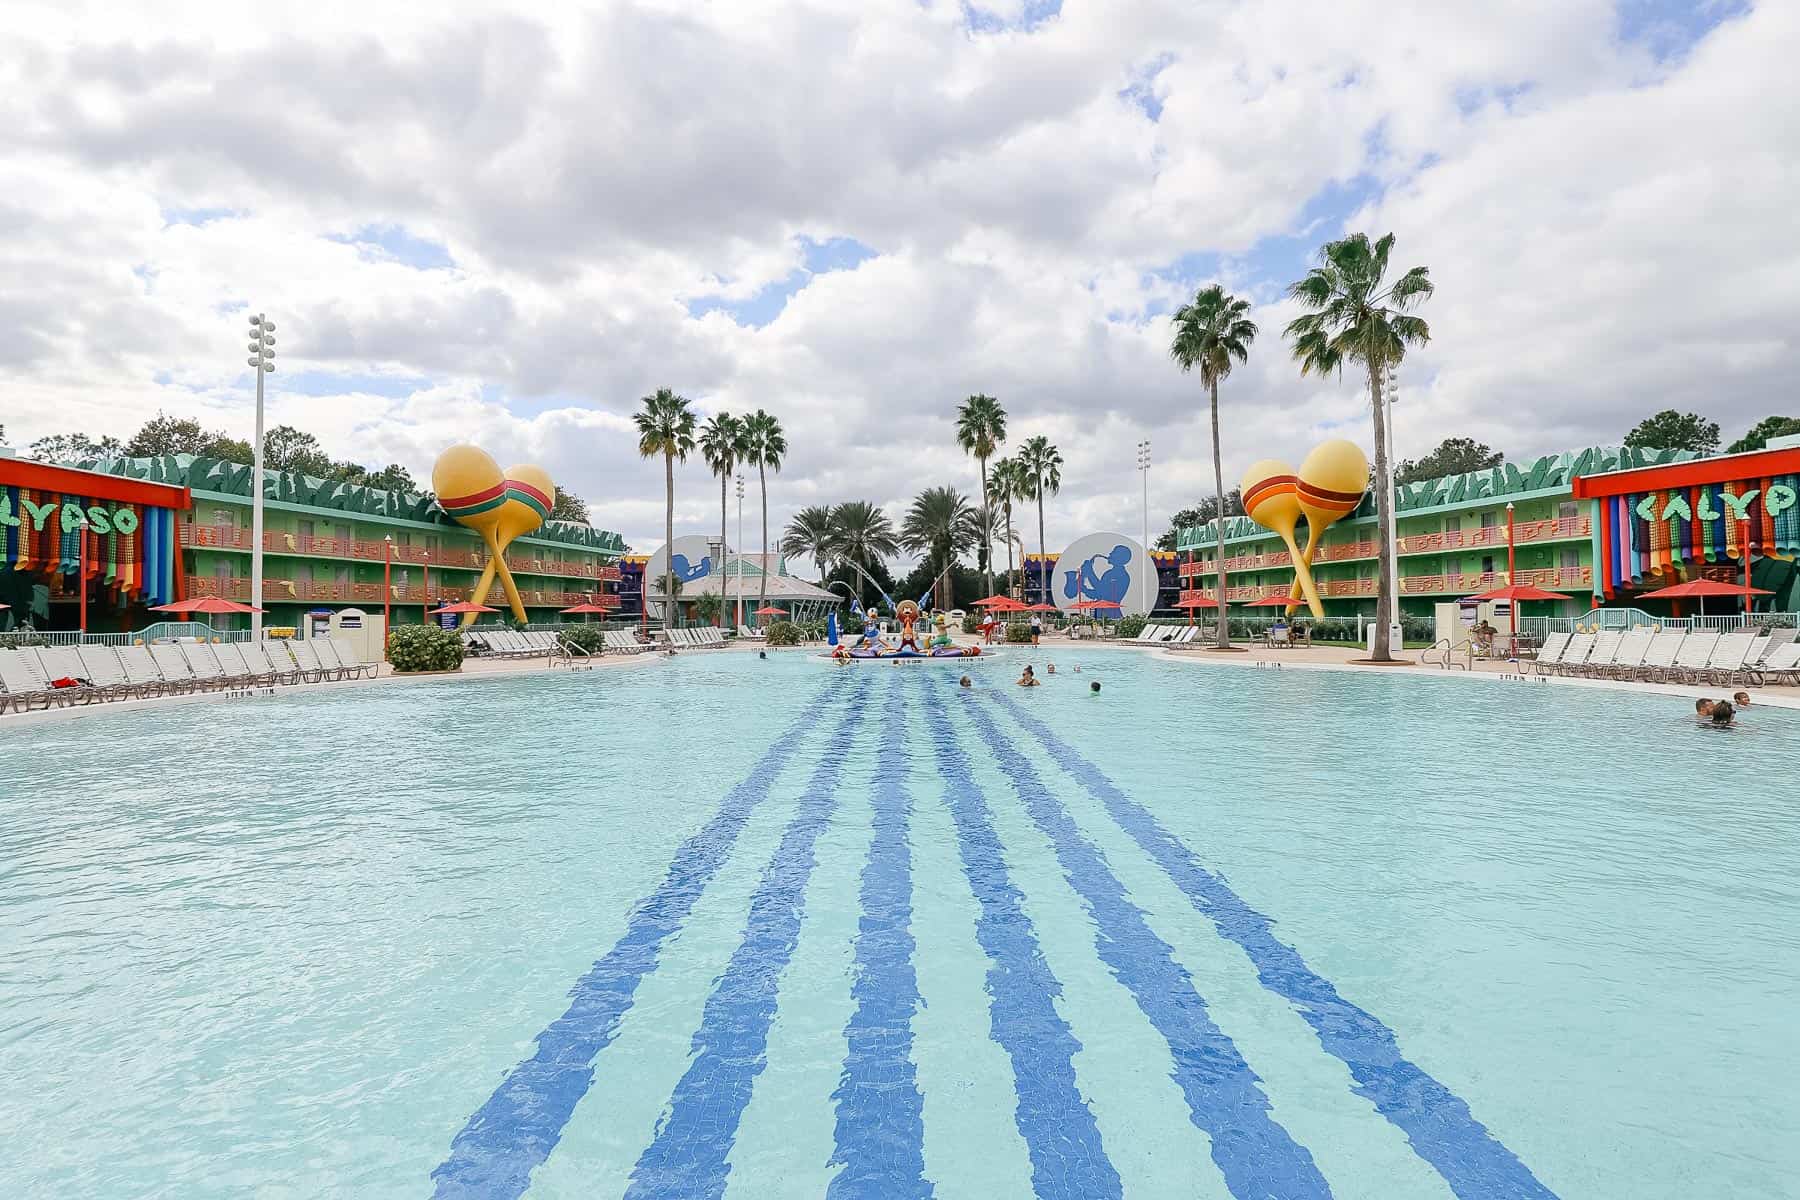 Stripes resembling guitar strings are painted on the bottom of the pool at Disney's All-Star Music. 